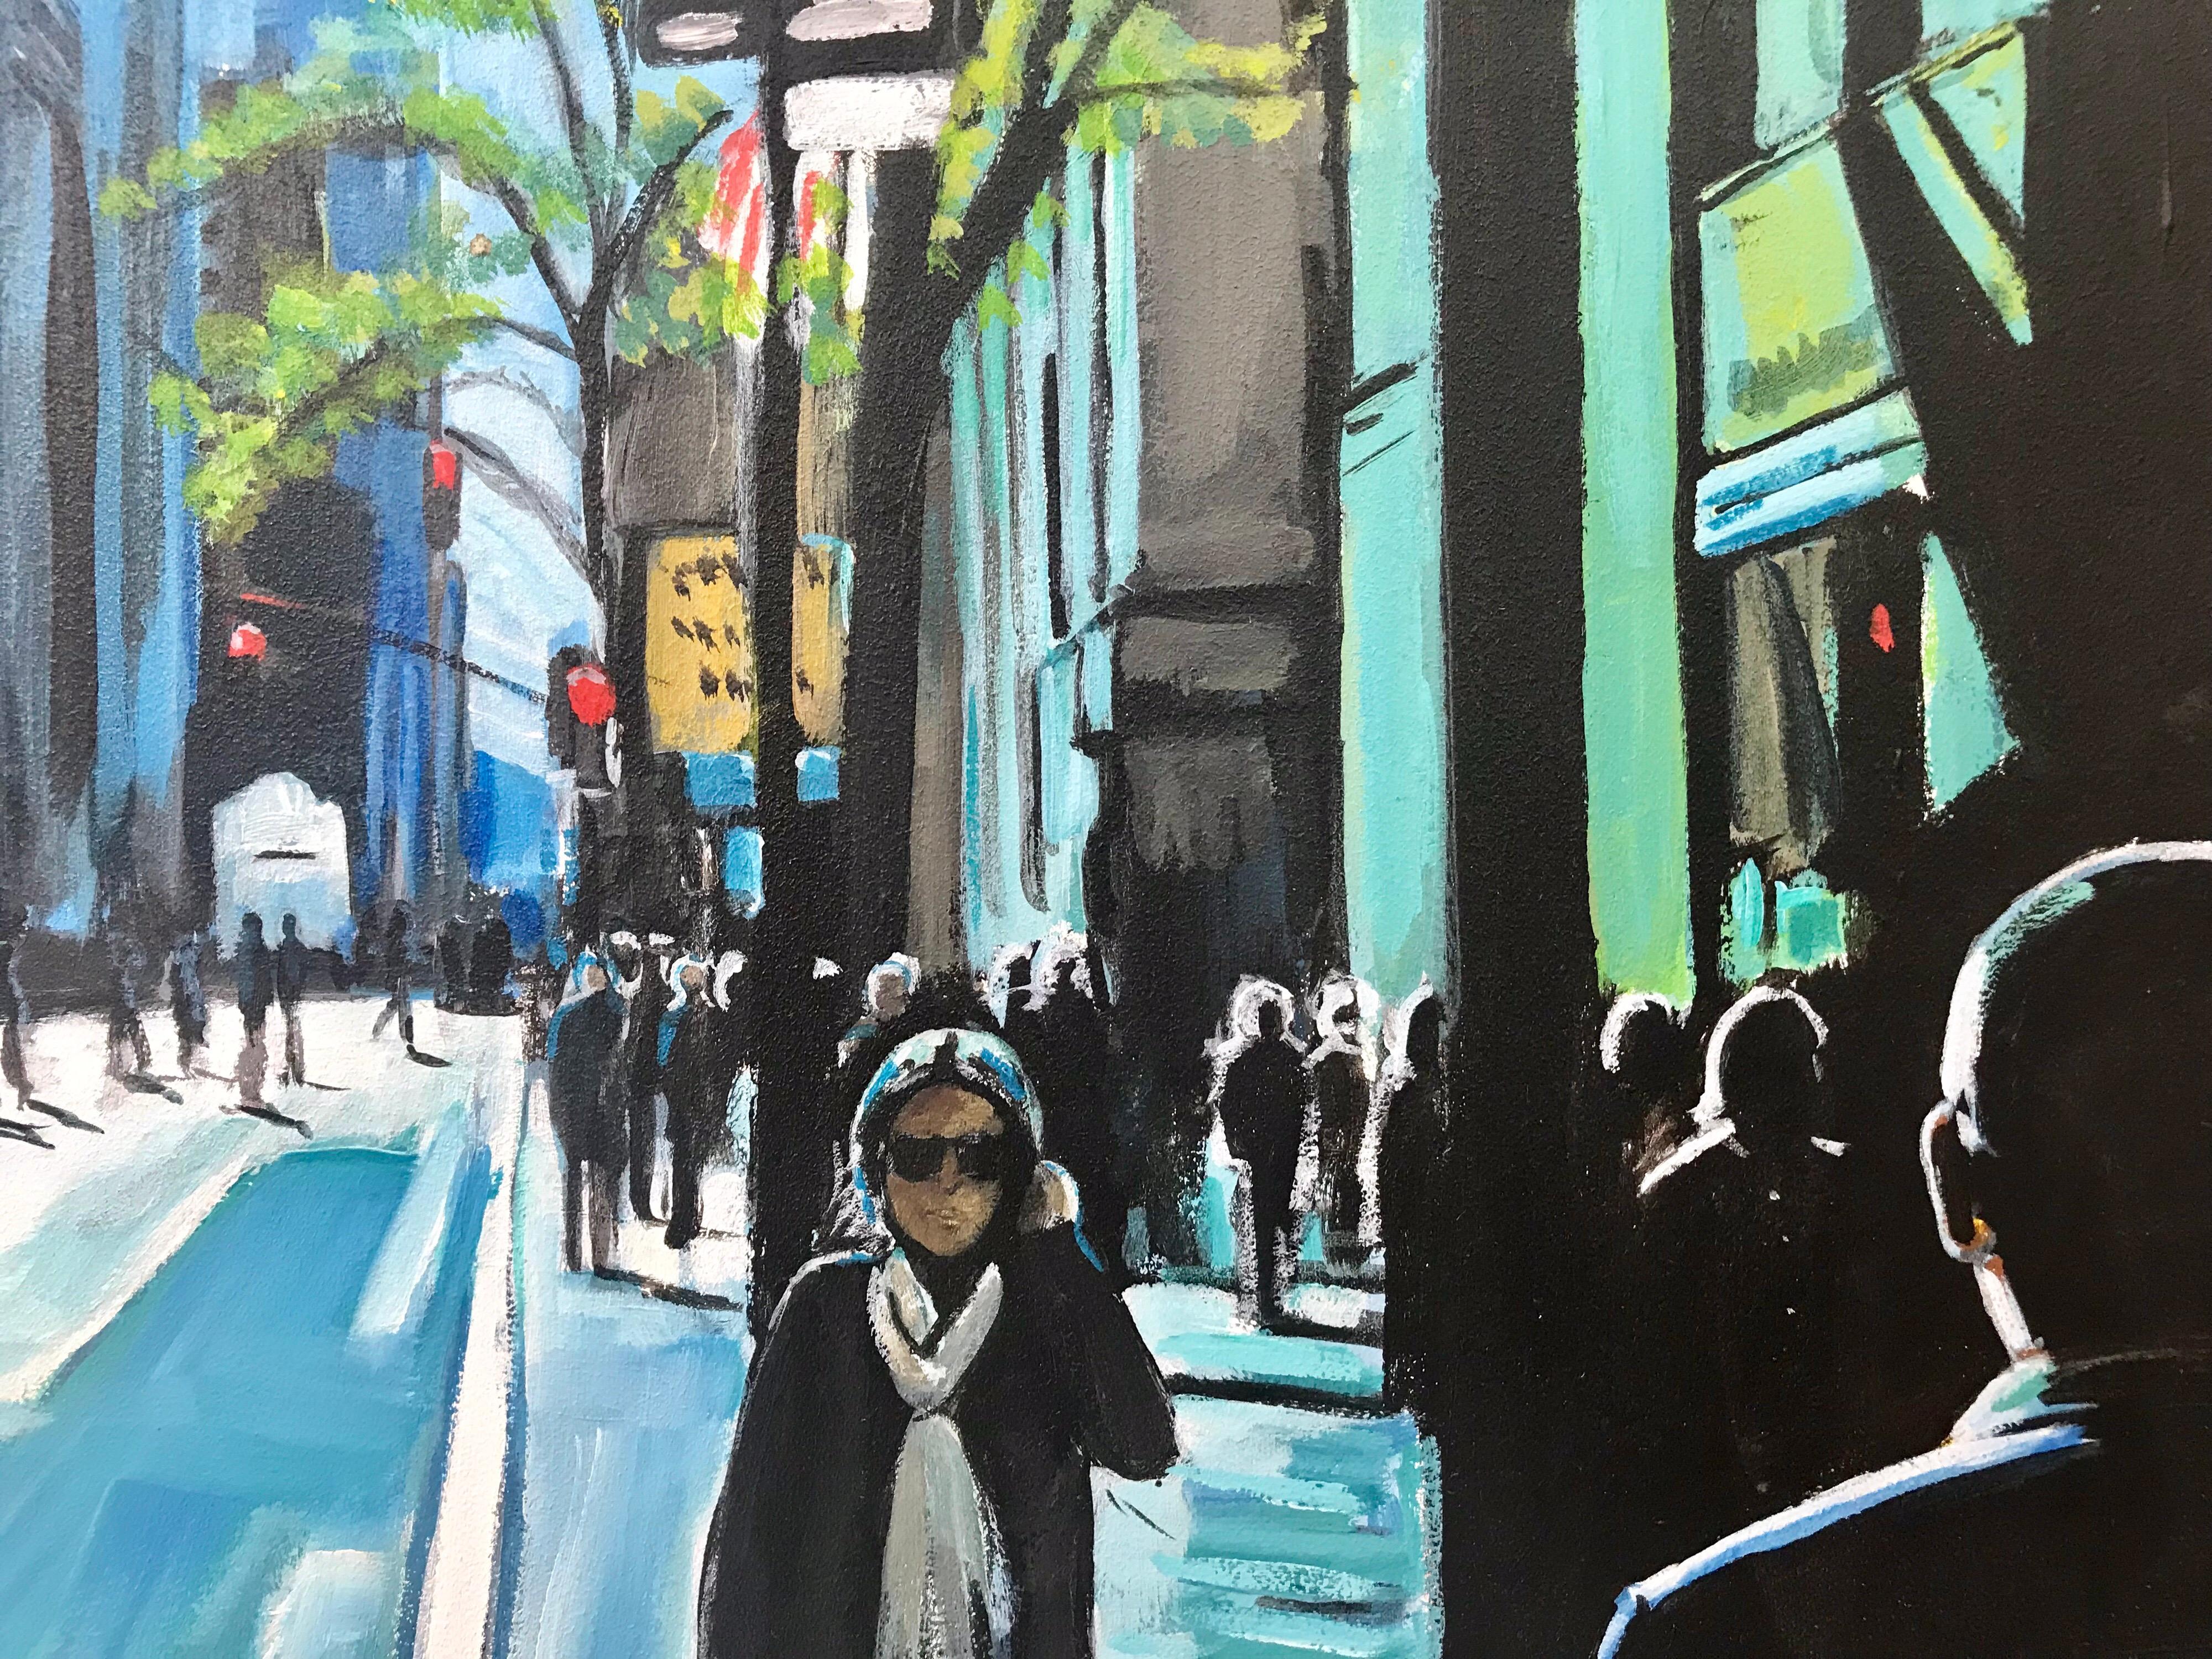 Blue Sky, Sunshine on Manhattan Street - Figurative New York City Painting by Leading British Urban Landscape Artist, Angela Wakefield, with dramatic light and colours.

Art measures 24 x 18 inches
Frame measure 29 x 23 inches

Angela Wakefield has